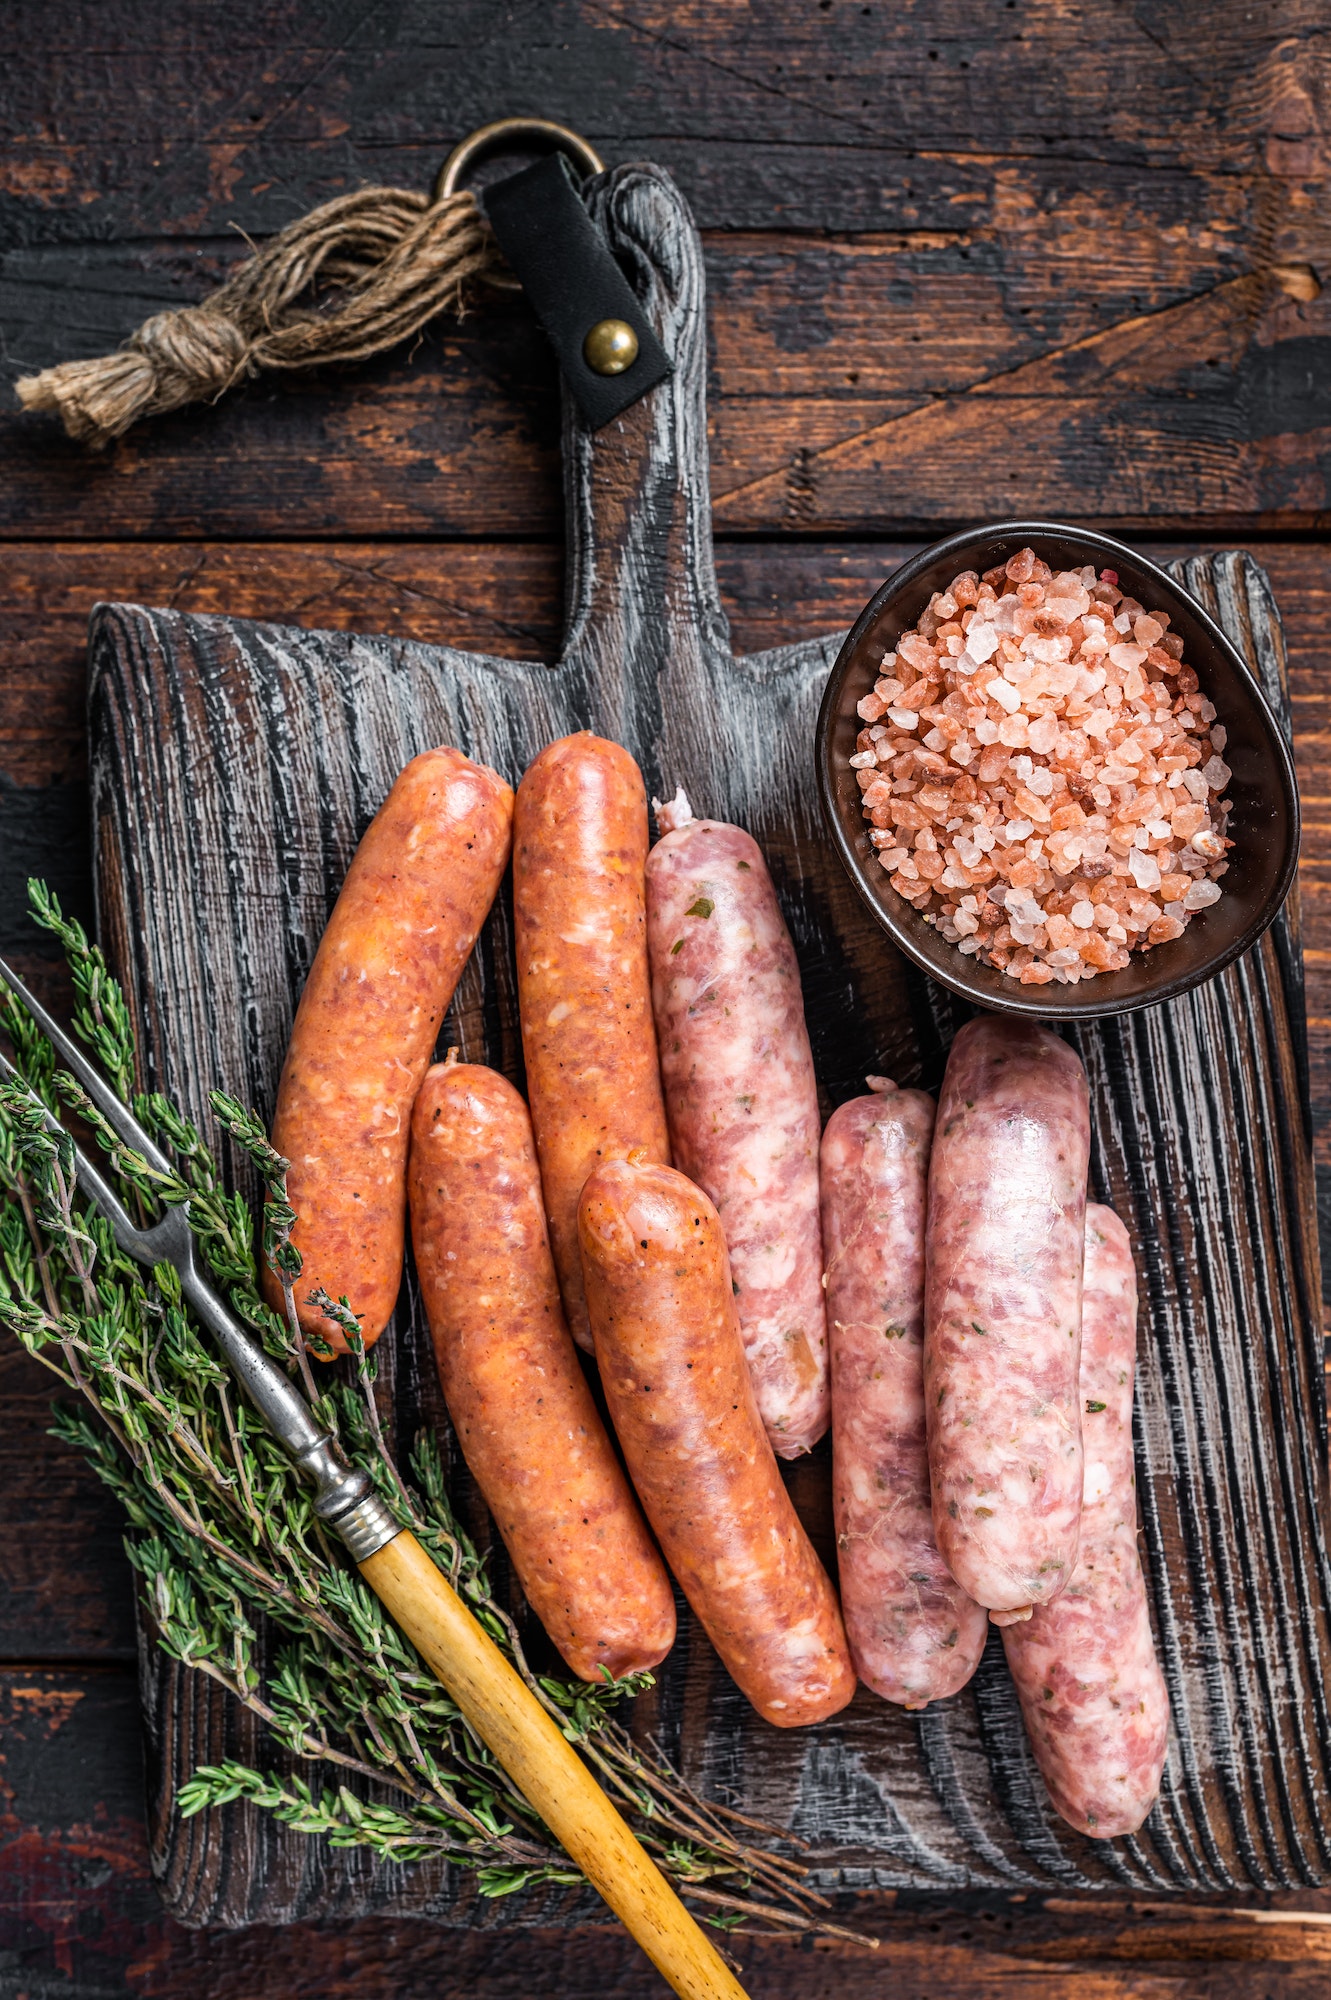 Assorted Raw pork and beef sausages with spices on a wooden board with thyme.